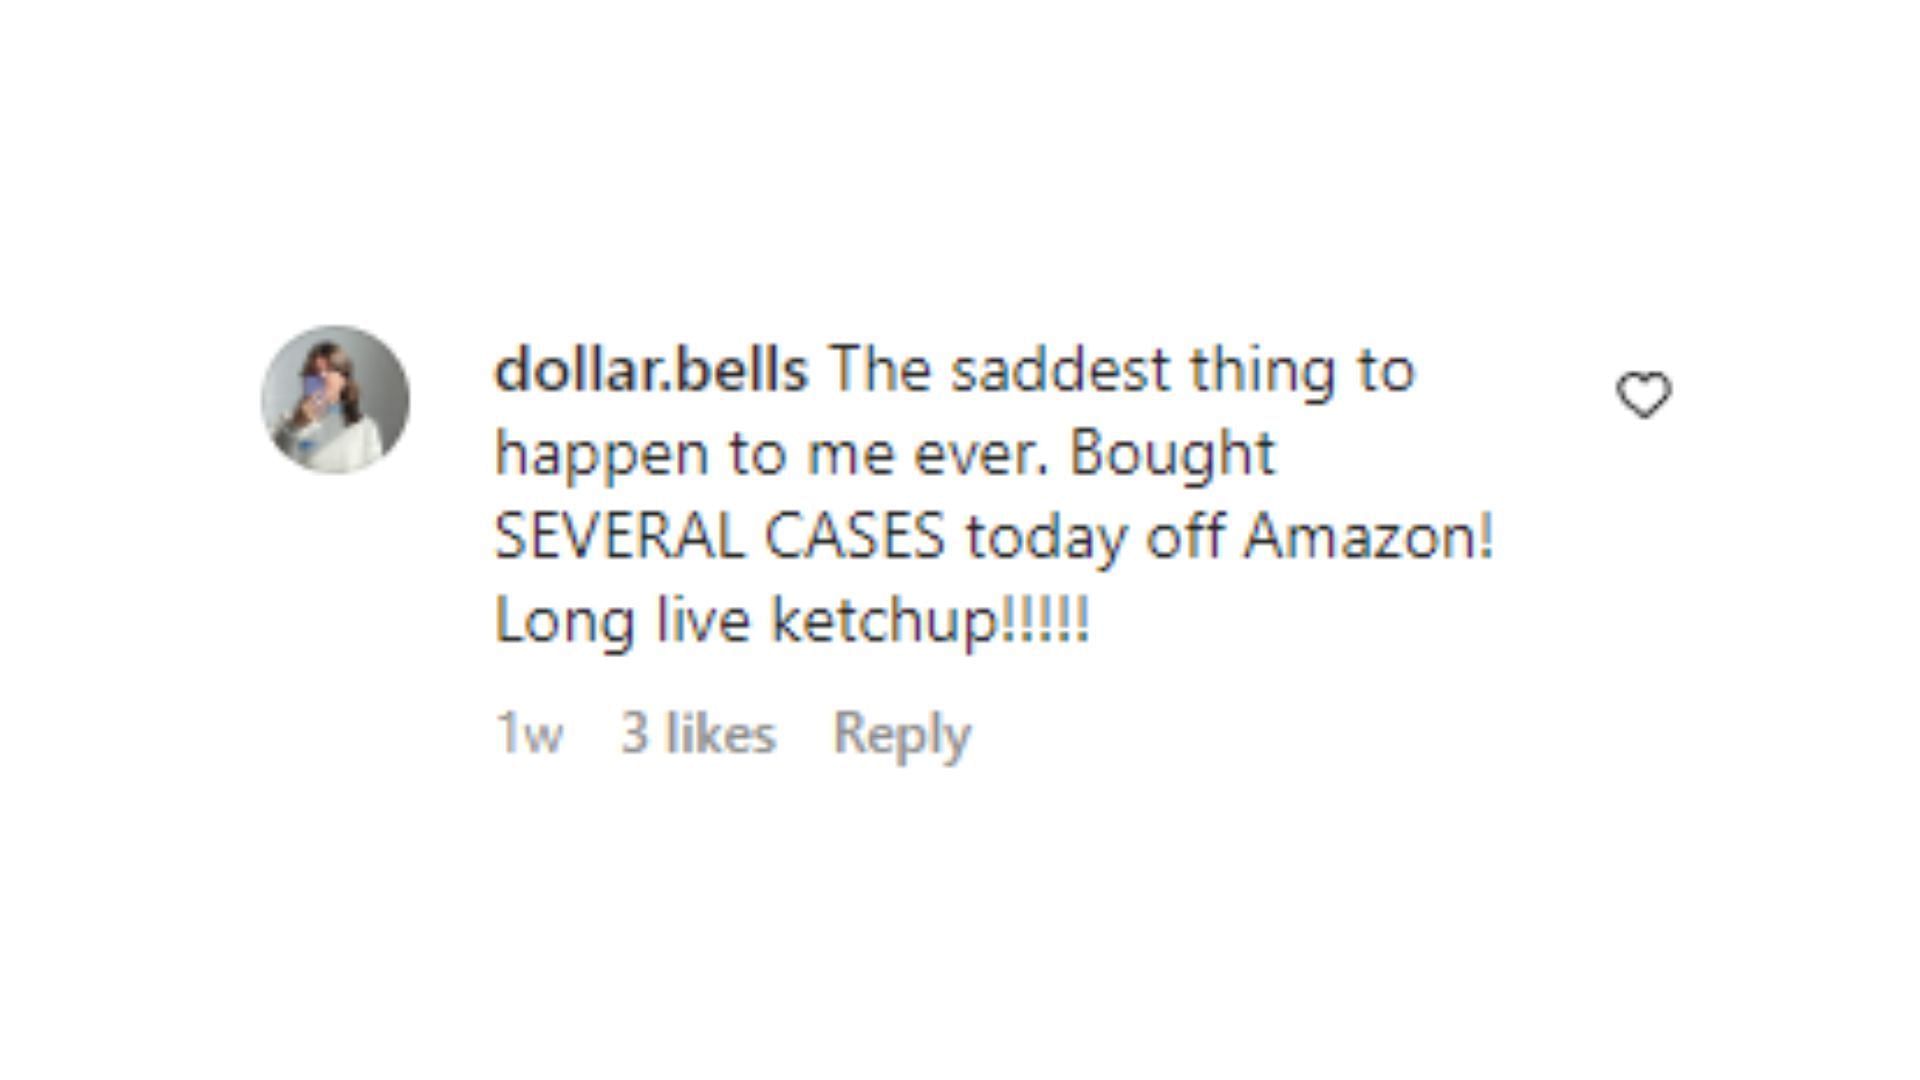 comment by the user @dollar.bells